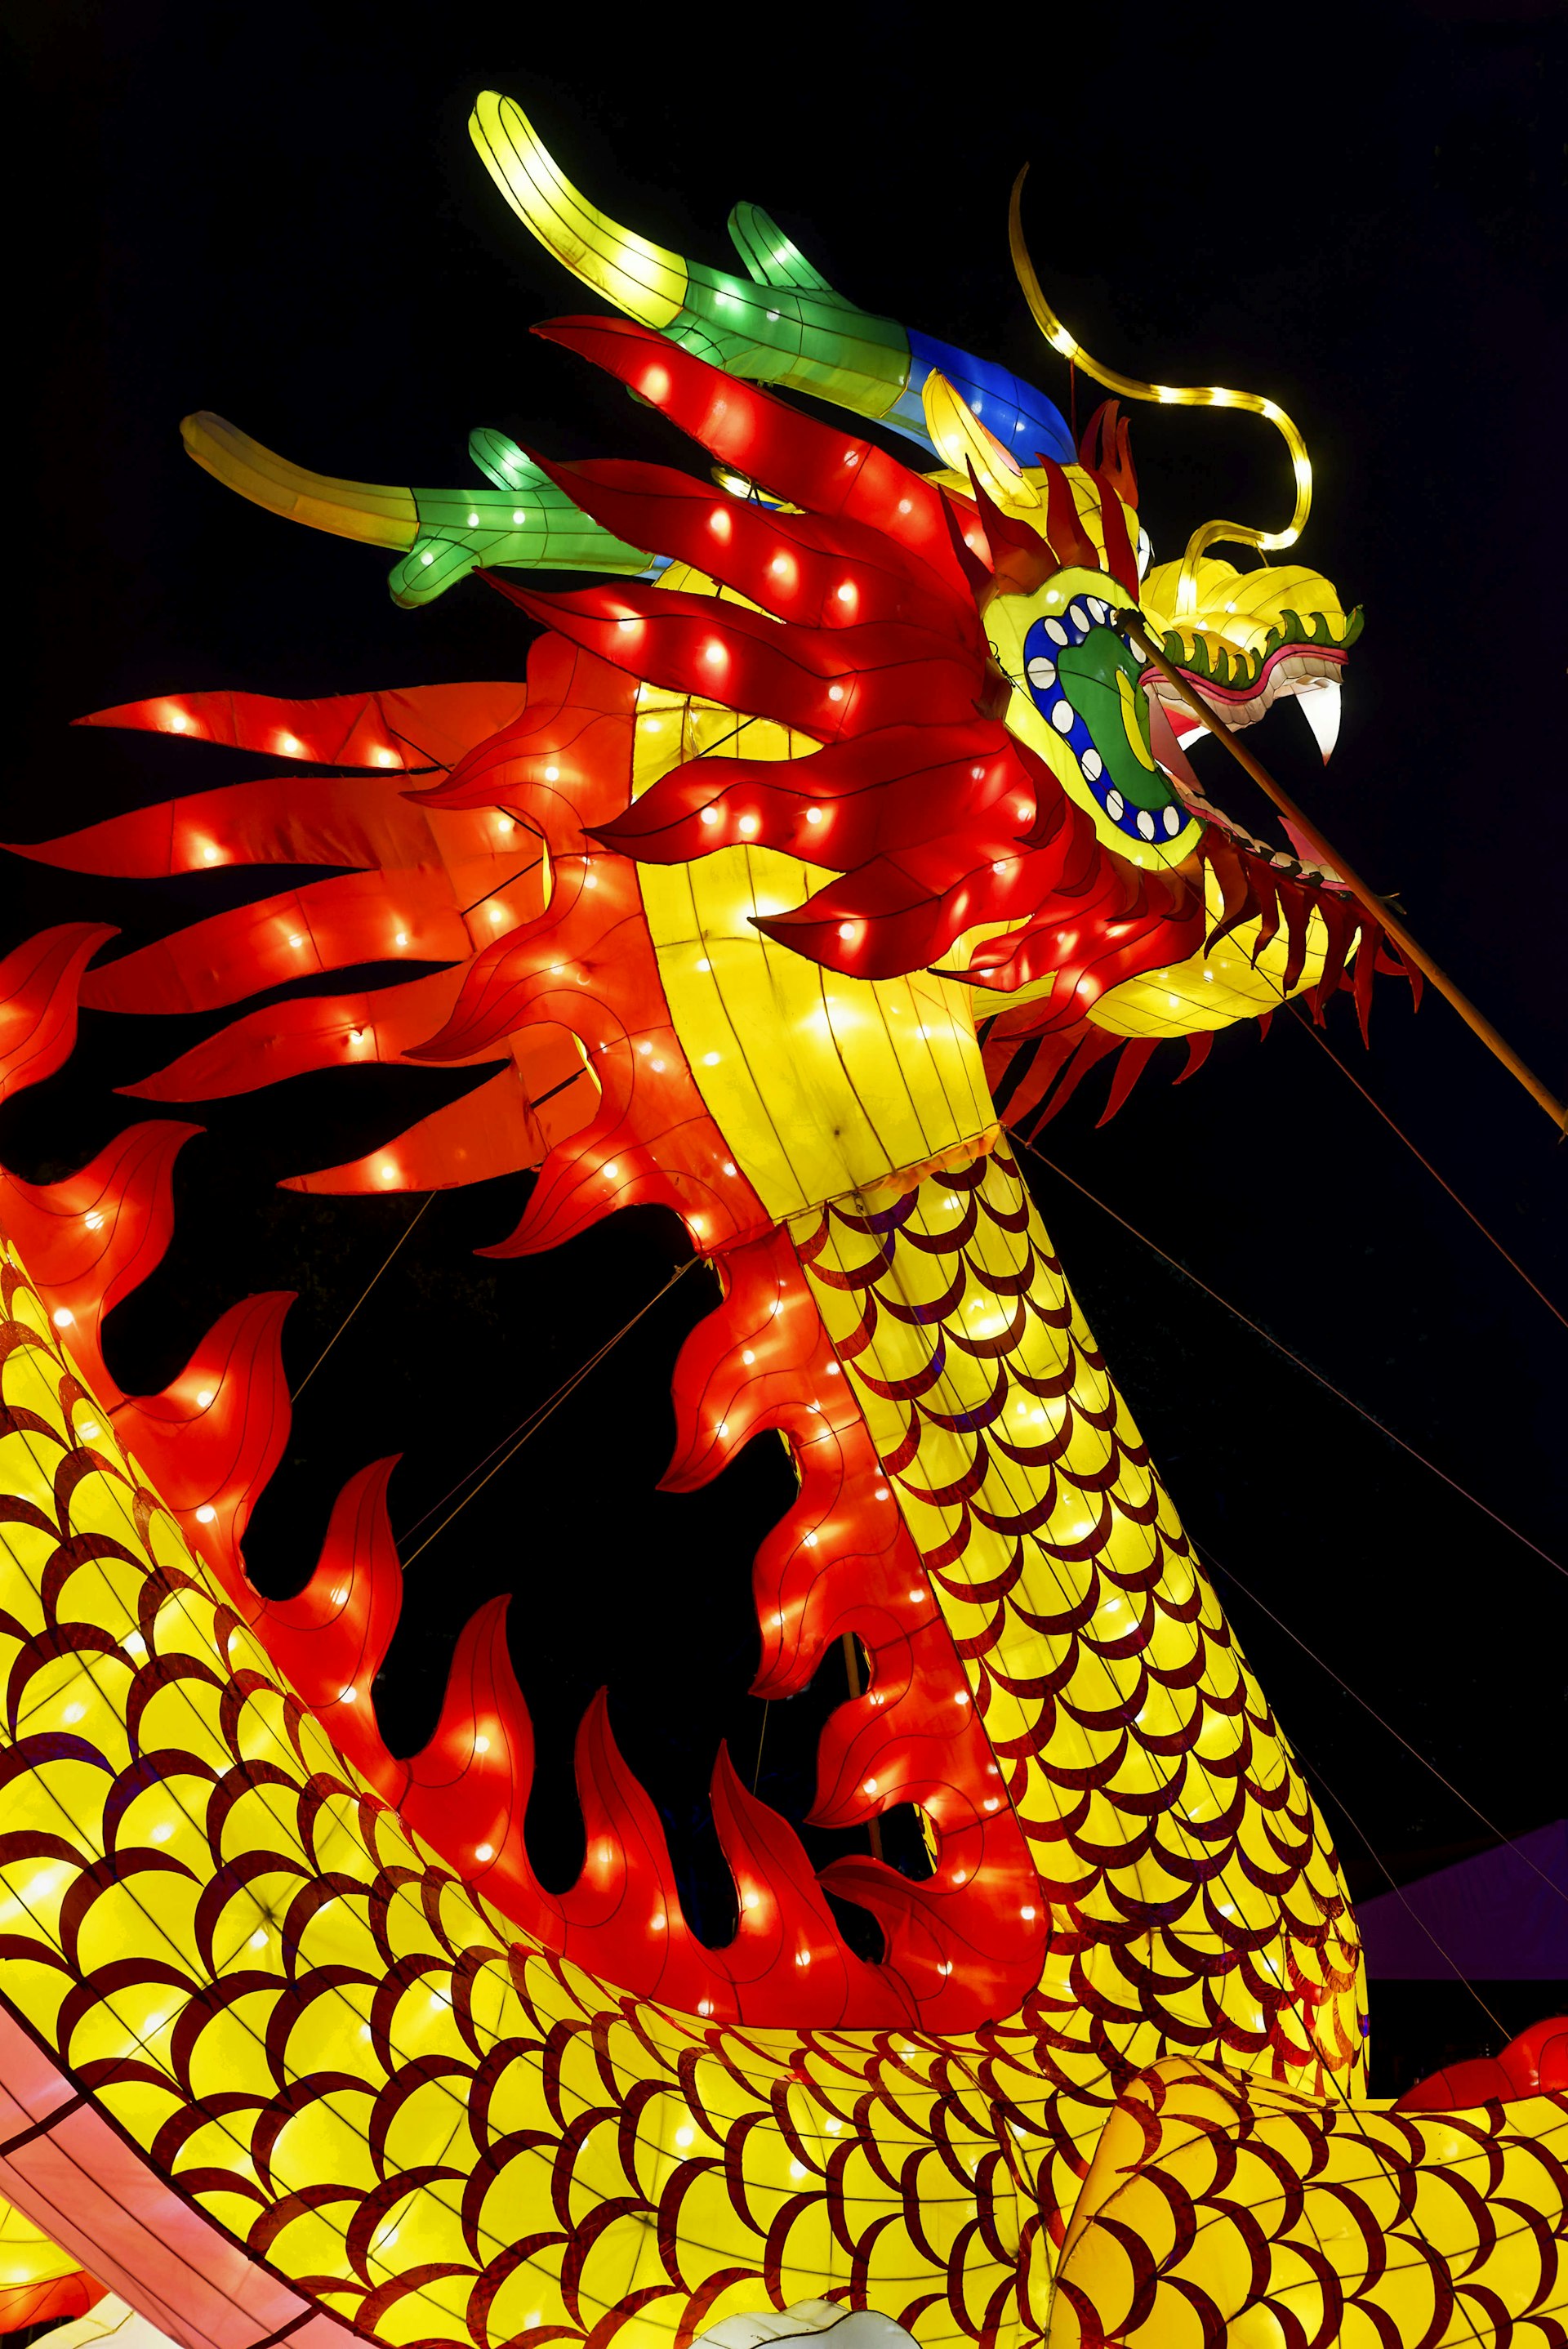 Closeup of an illuminated Chinese lantern in the shape of a dragon.  